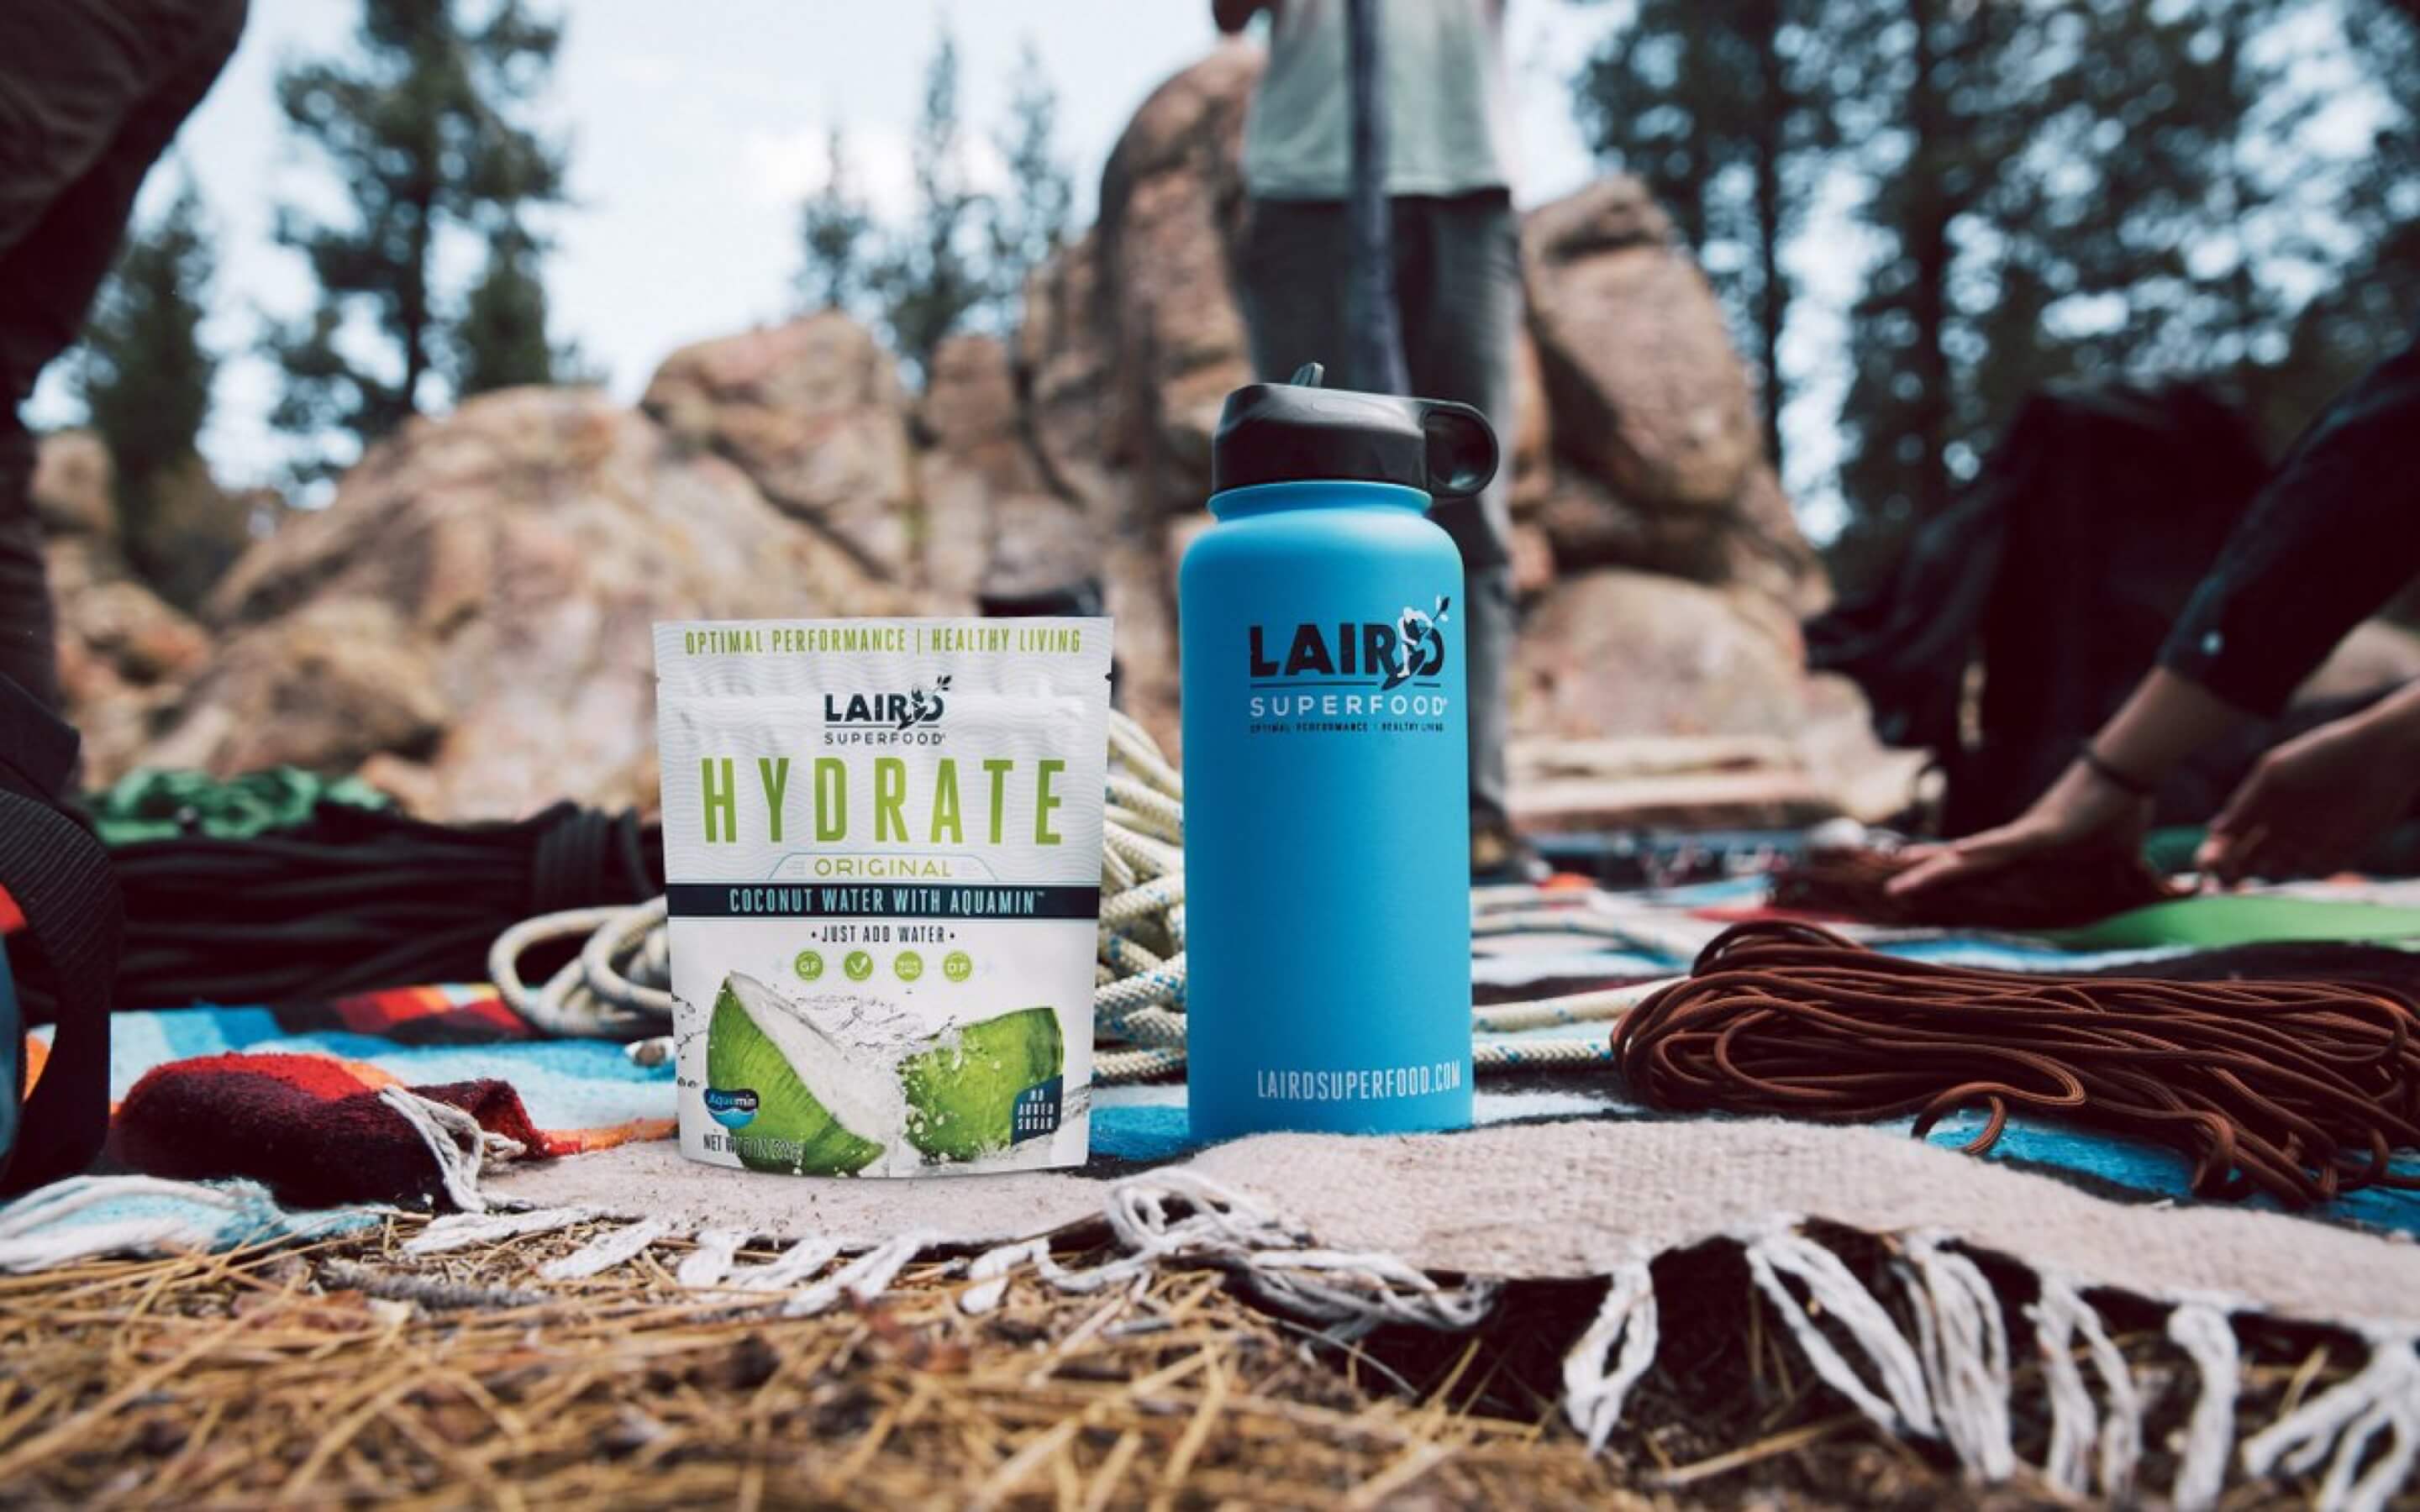 A Laird Superfood package sits beside a blue Laird Superfood water bottle in an outdoor setting.